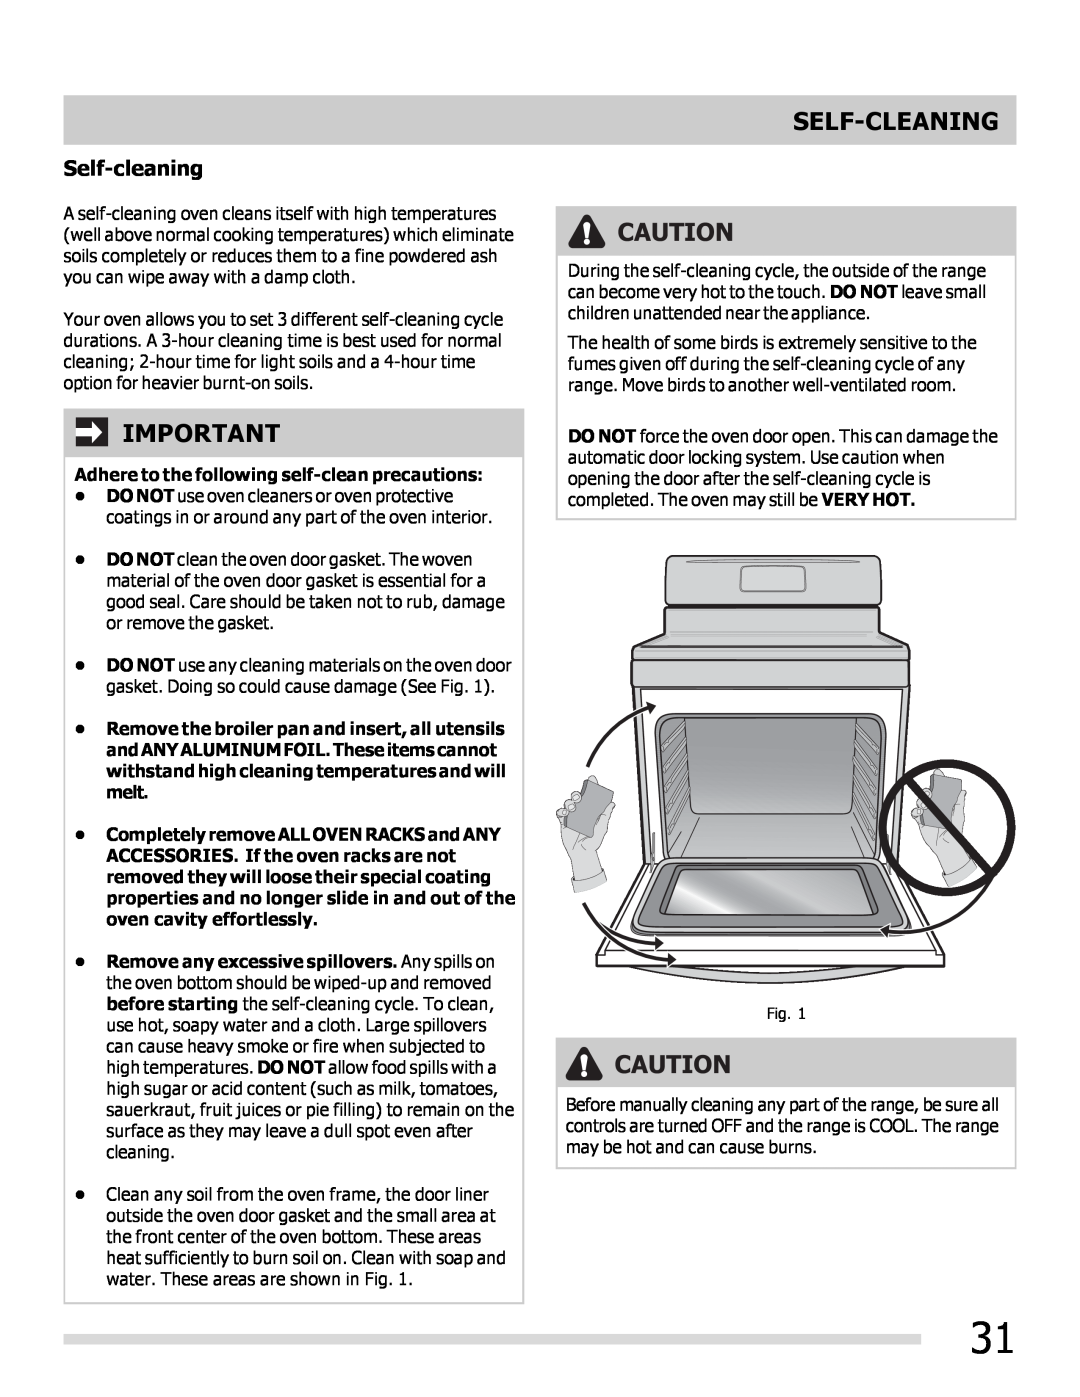 Frigidaire 316902202 important safety instructions Self-Cleaning, Self-cleaning 